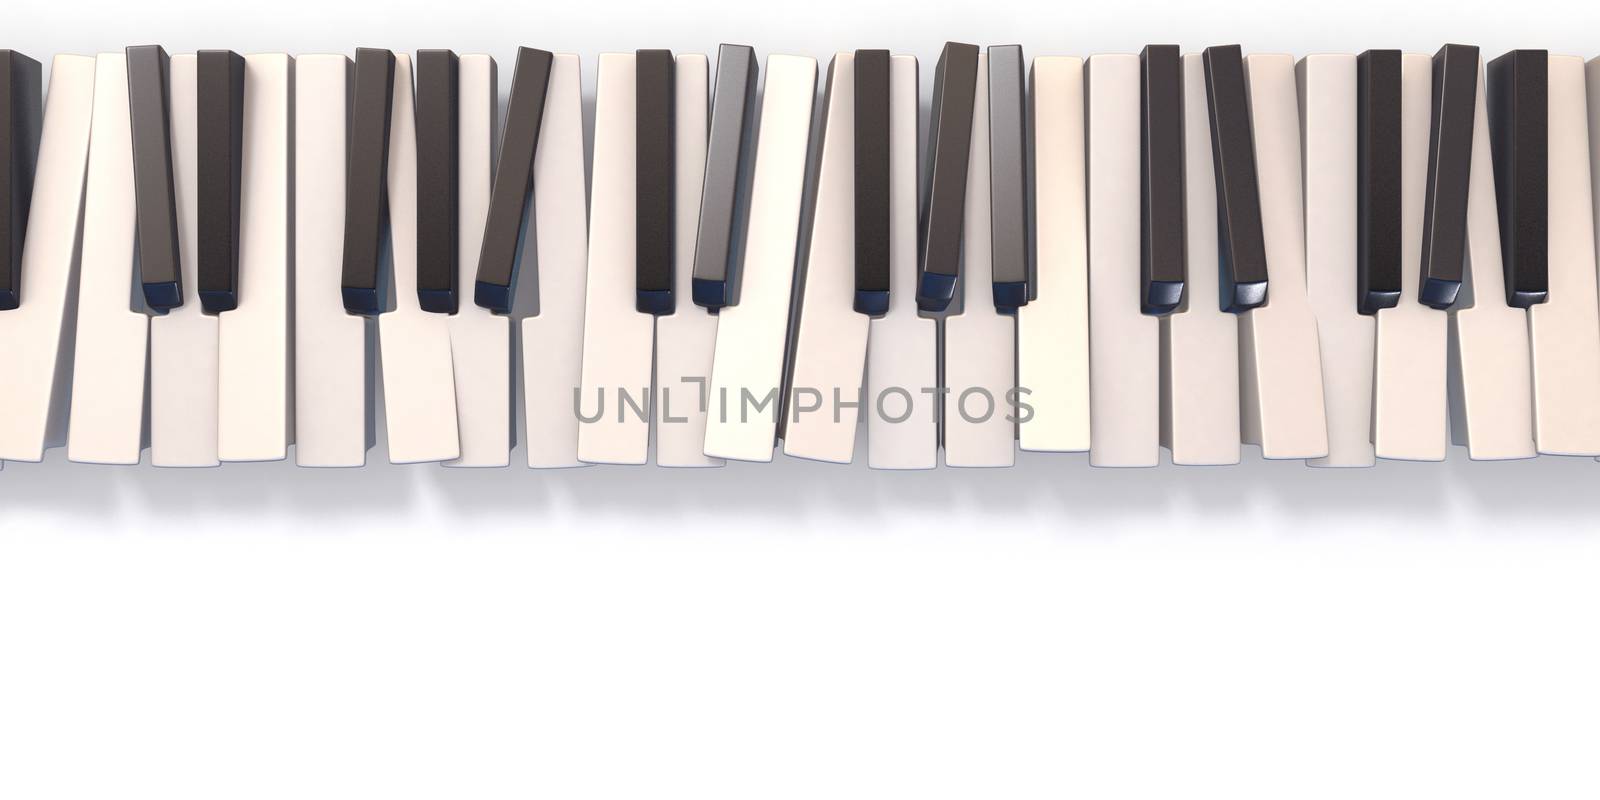 Unordered abstract piano keyboard 3D by djmilic